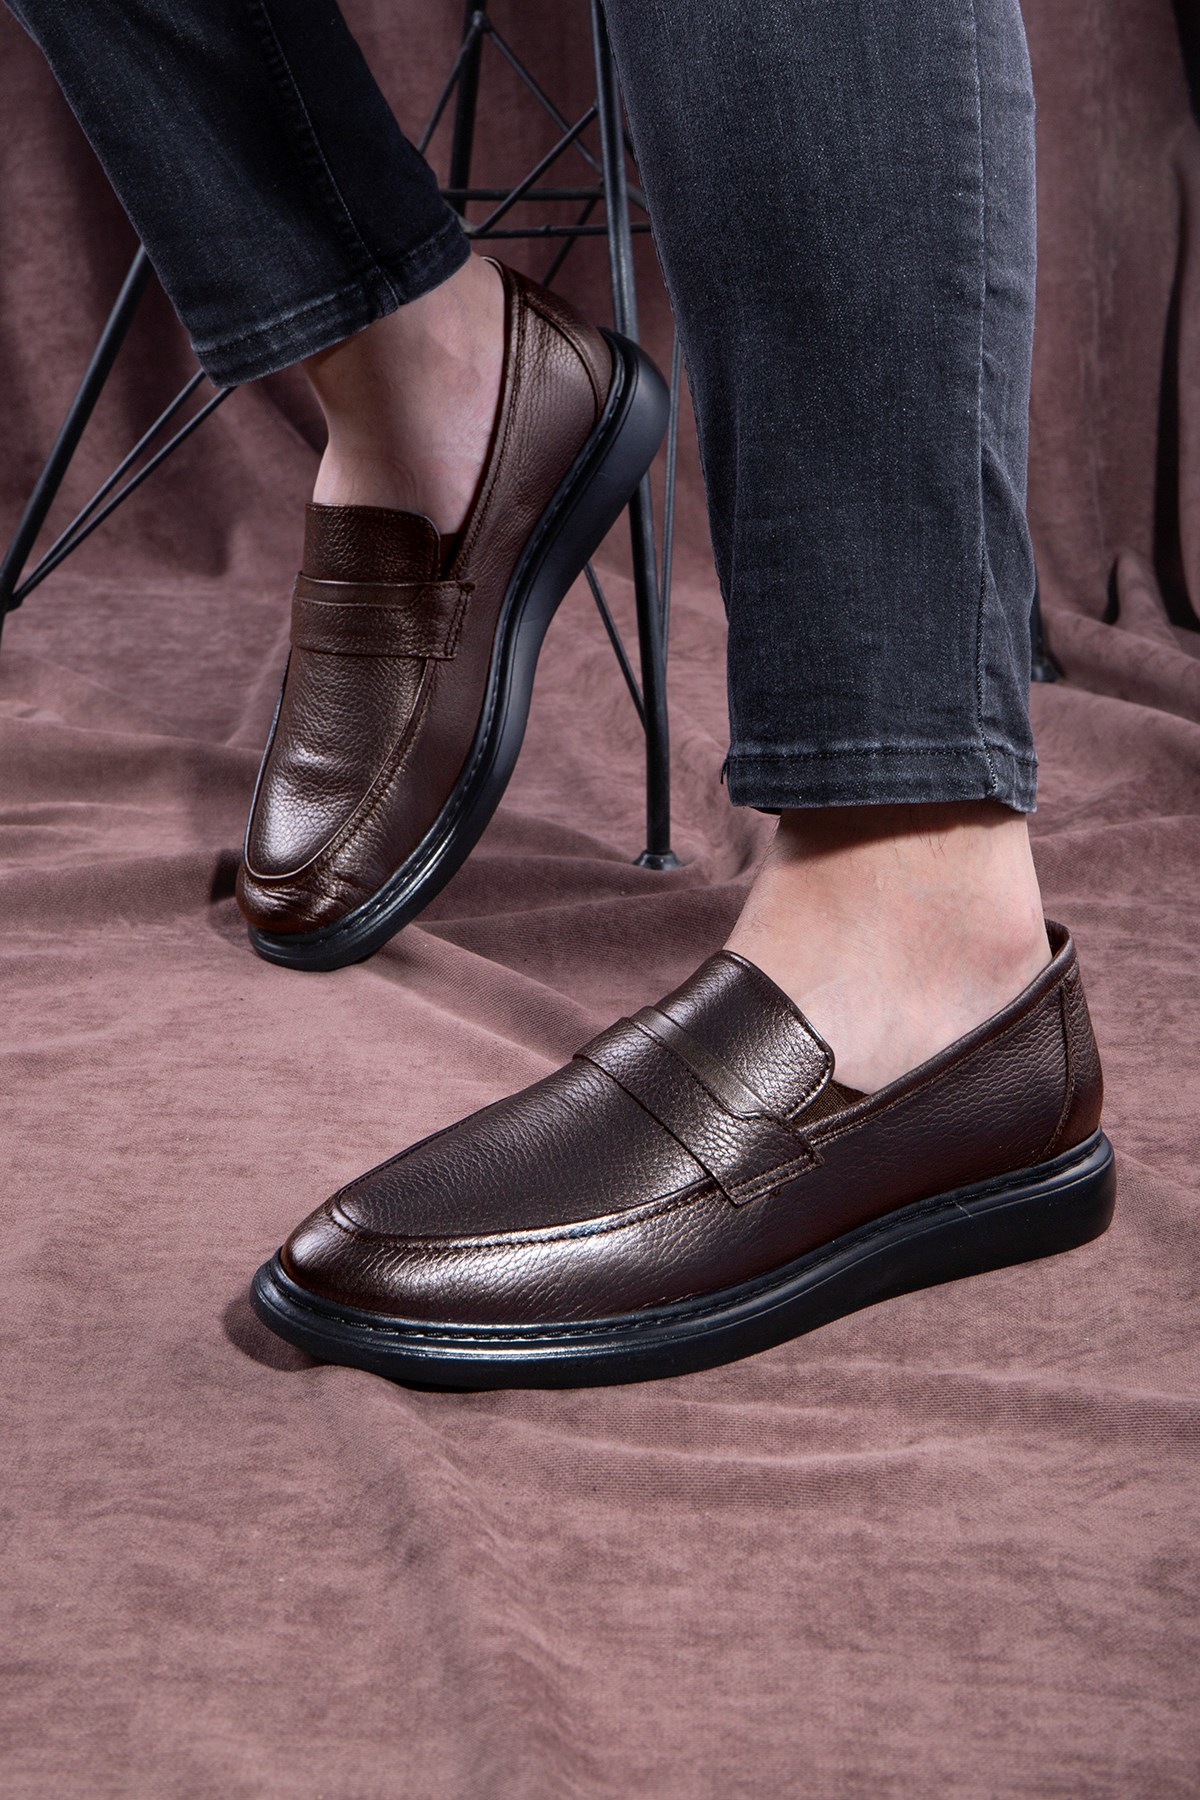 Frio Genuine Leather, Loafer Classic